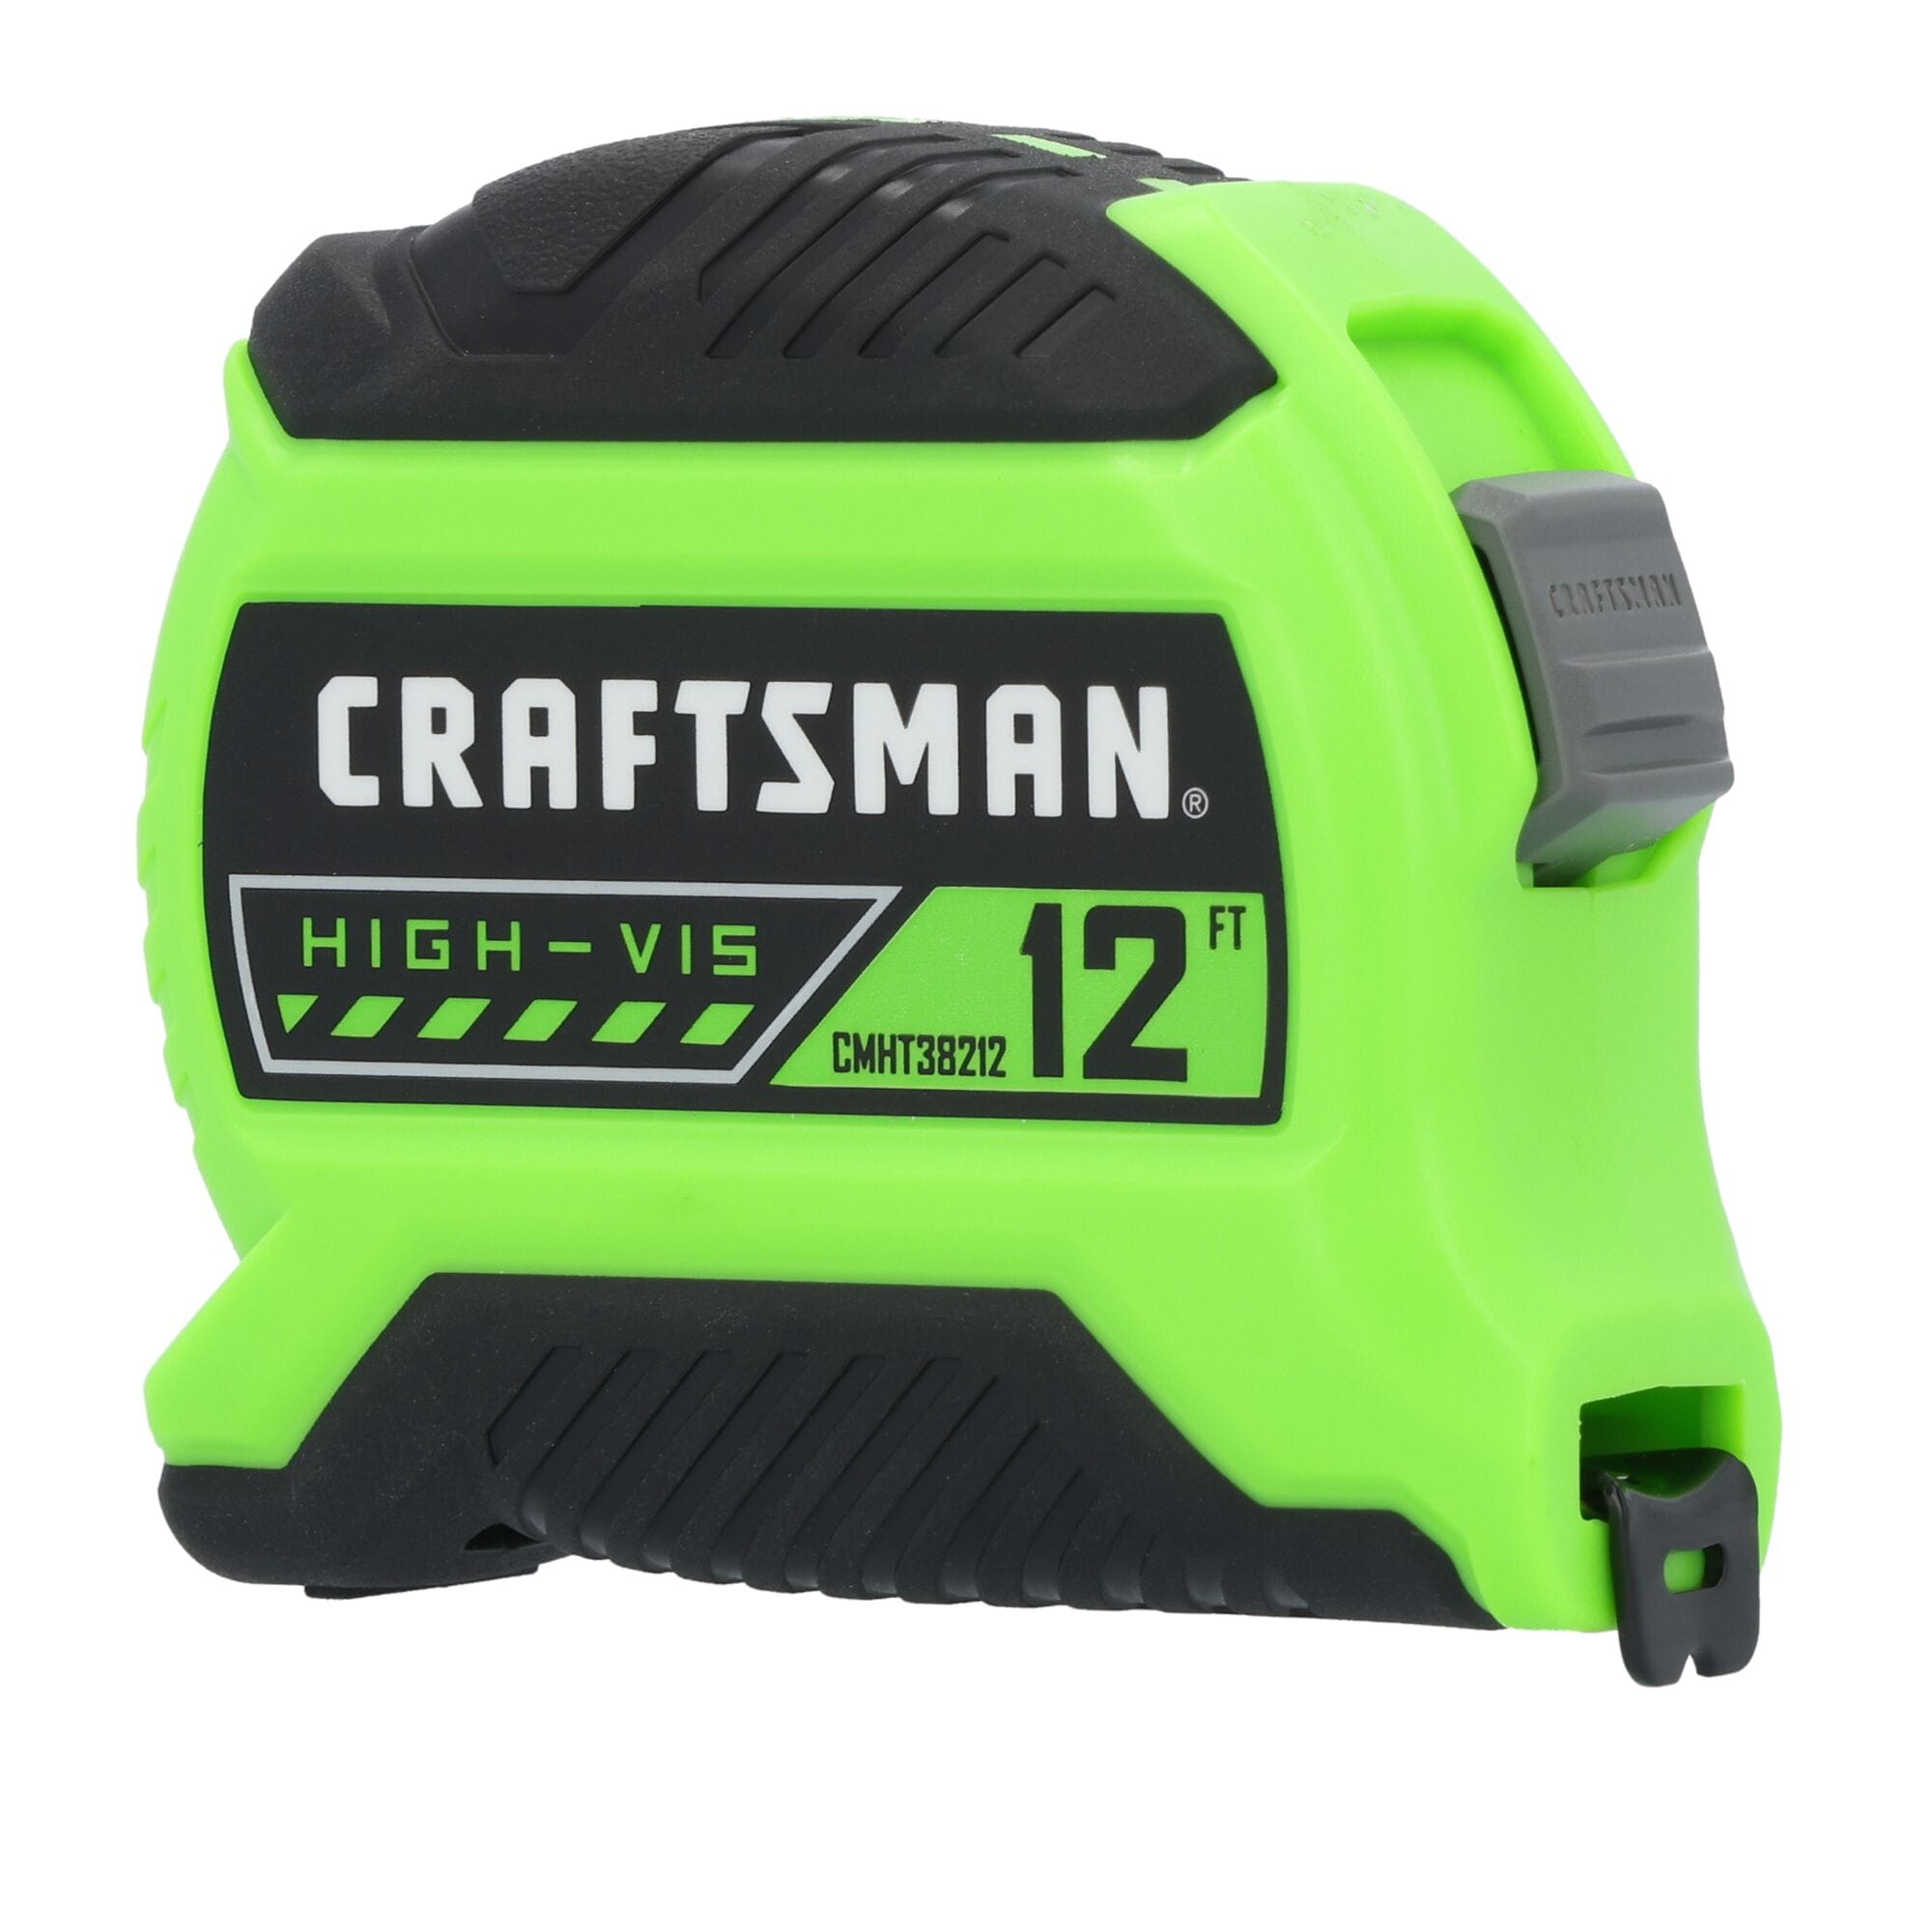 CRAFTSMAN High Visibility Measuring Tape - 1-in x 26-ft - Green CMHT37126S